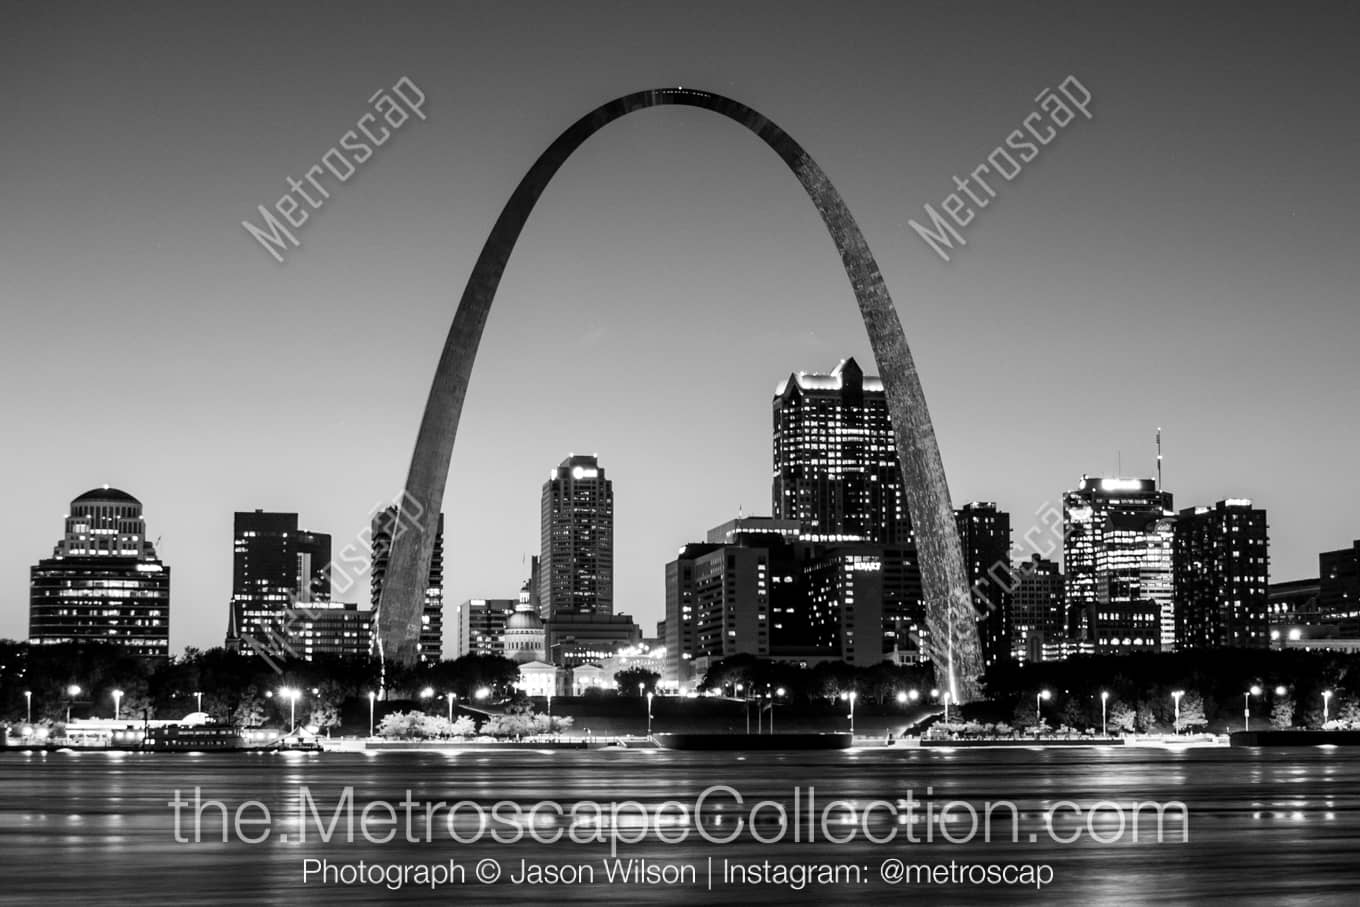 St Louis Missouri Picture at Night